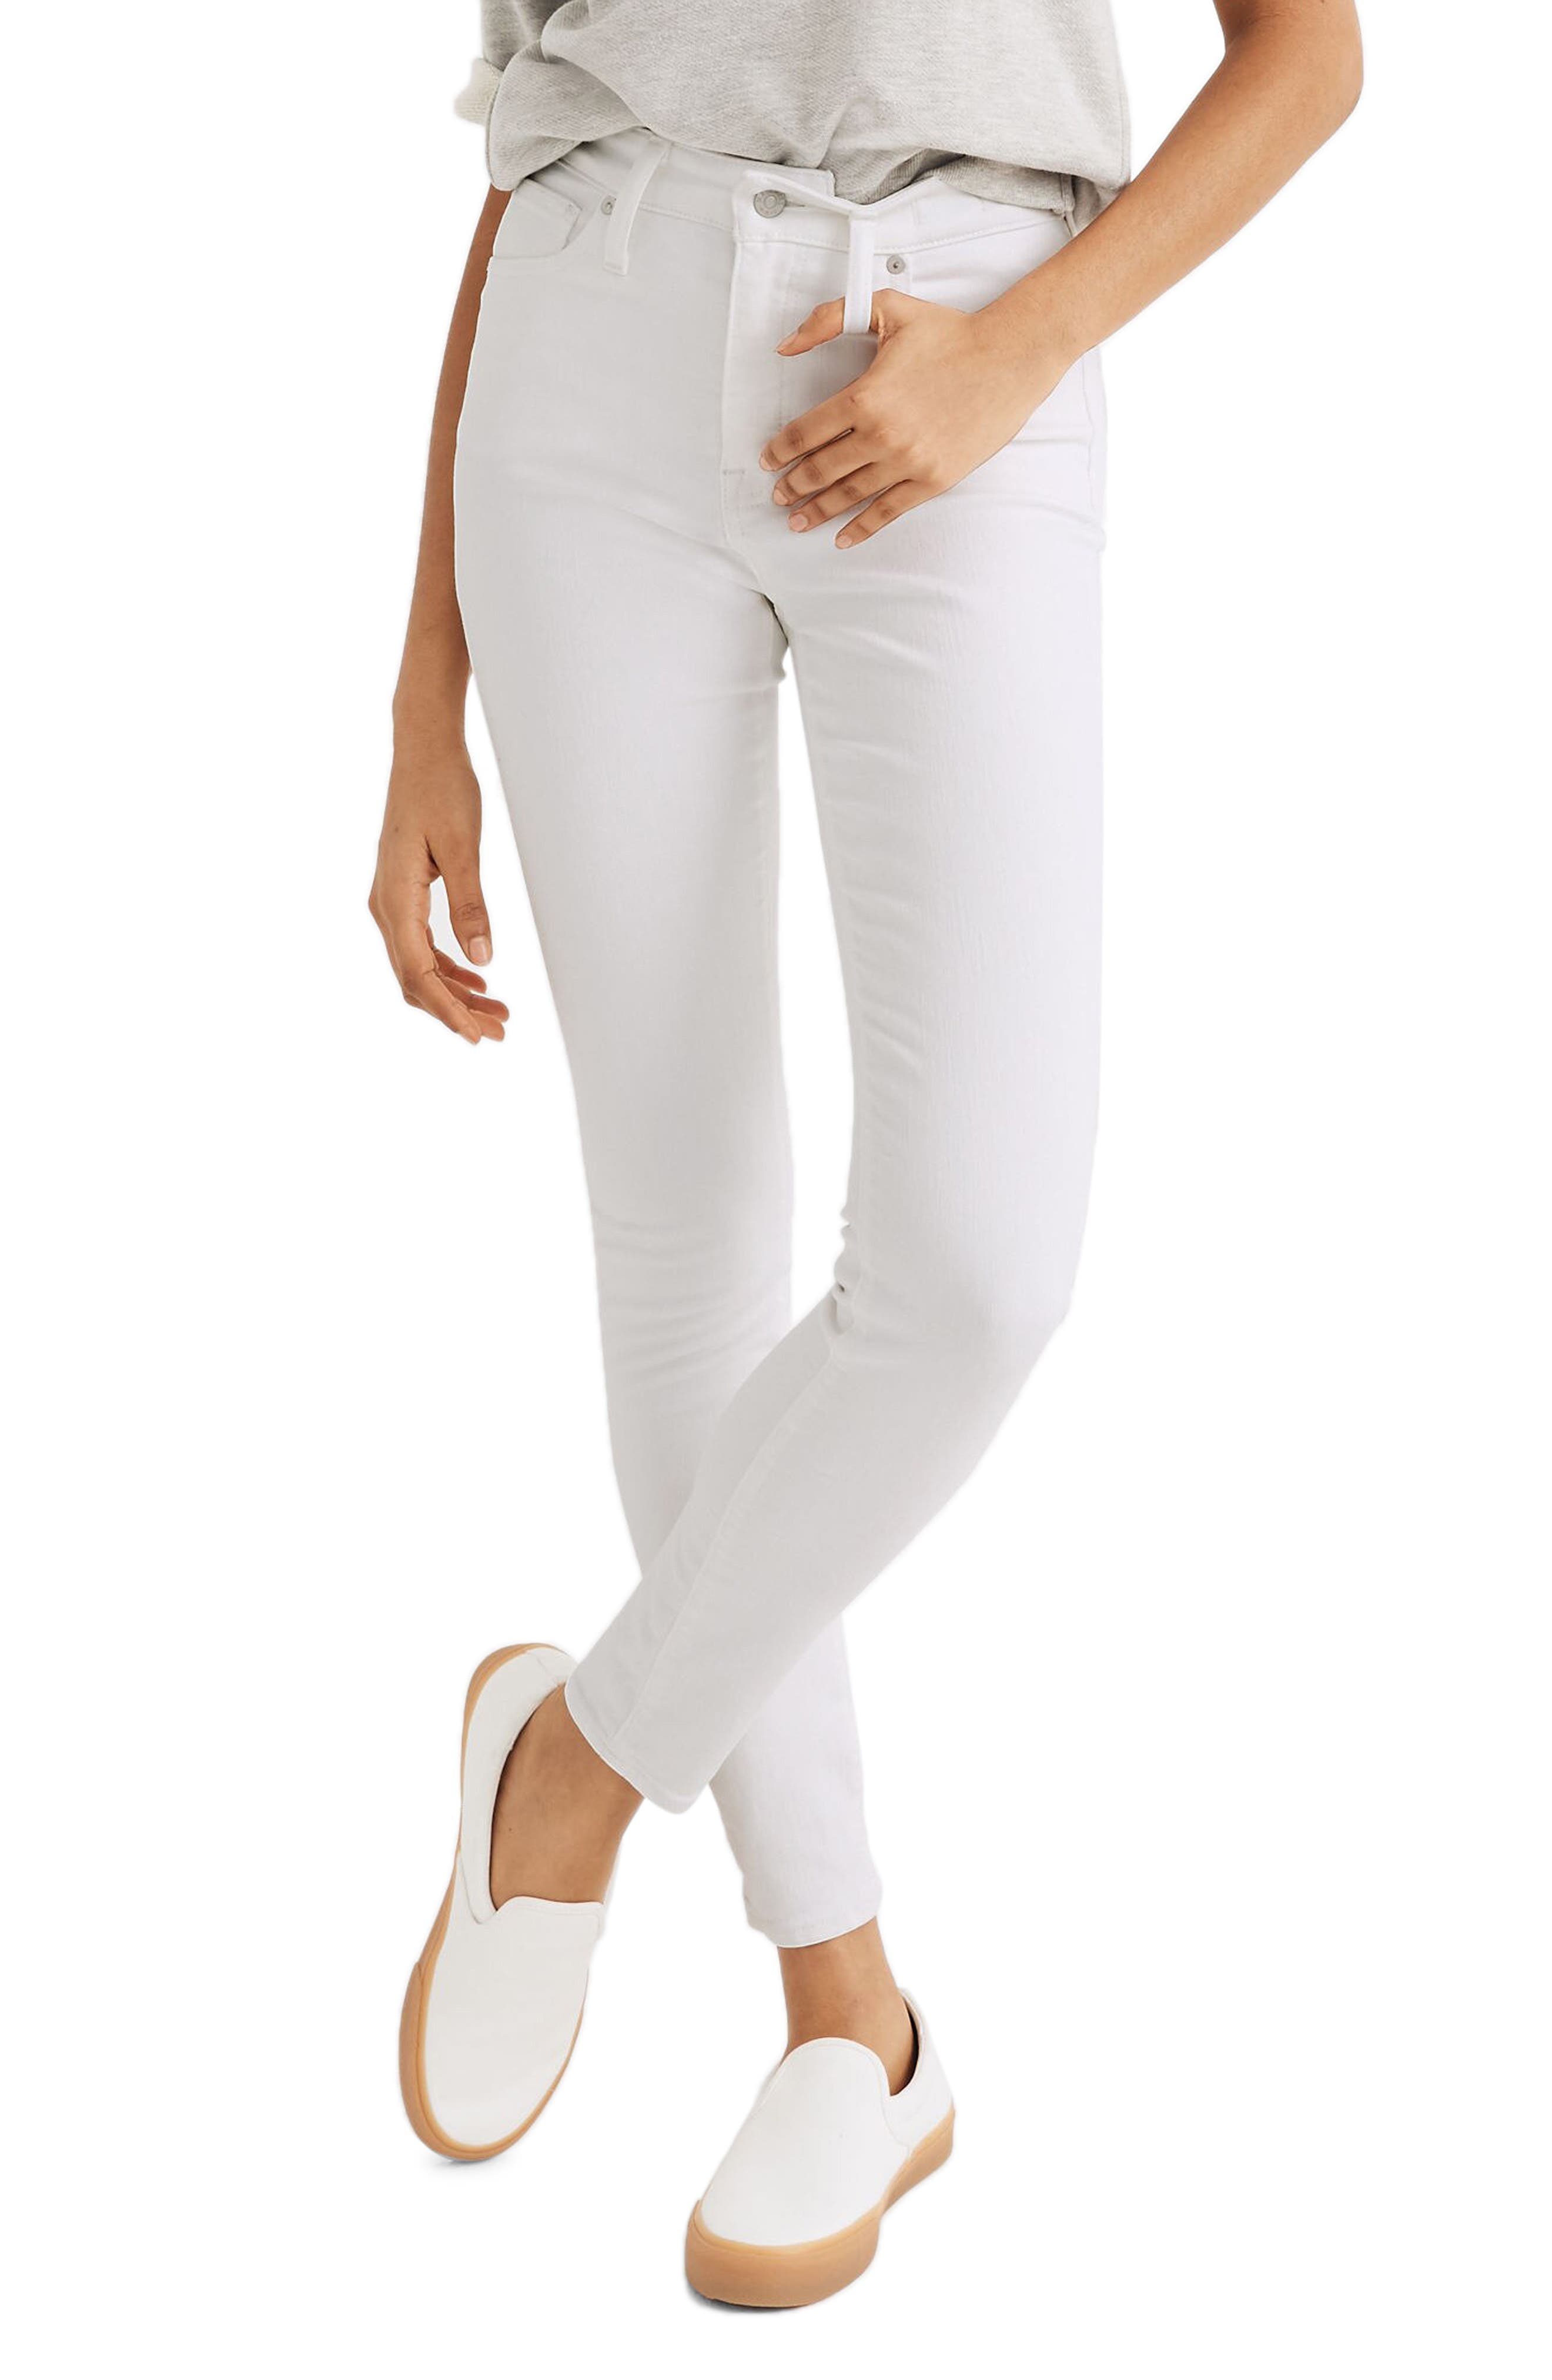 madewell white jeans nordstrom